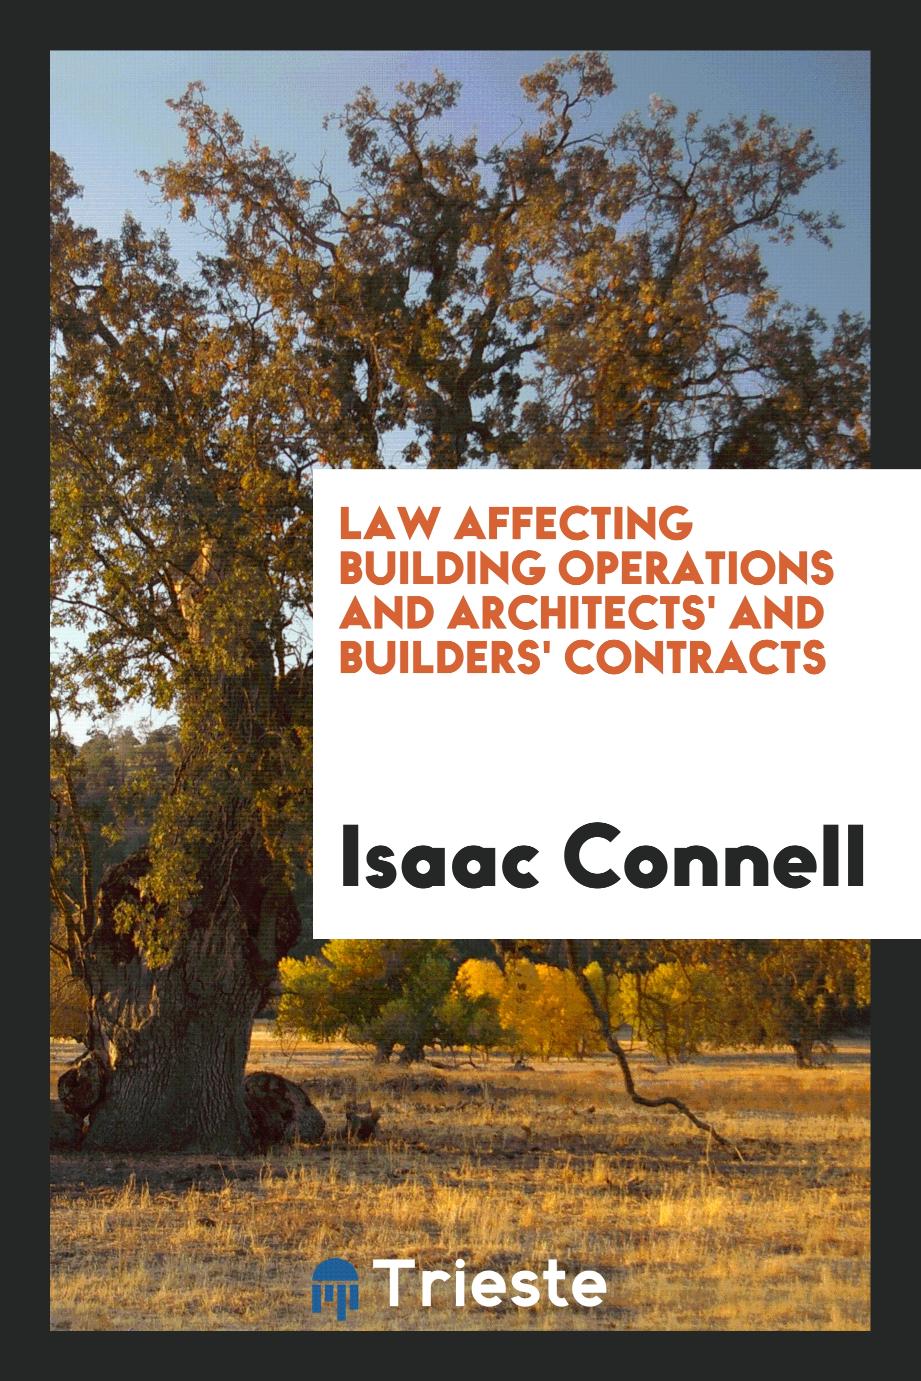 Law affecting building operations and architects' and builders' contracts